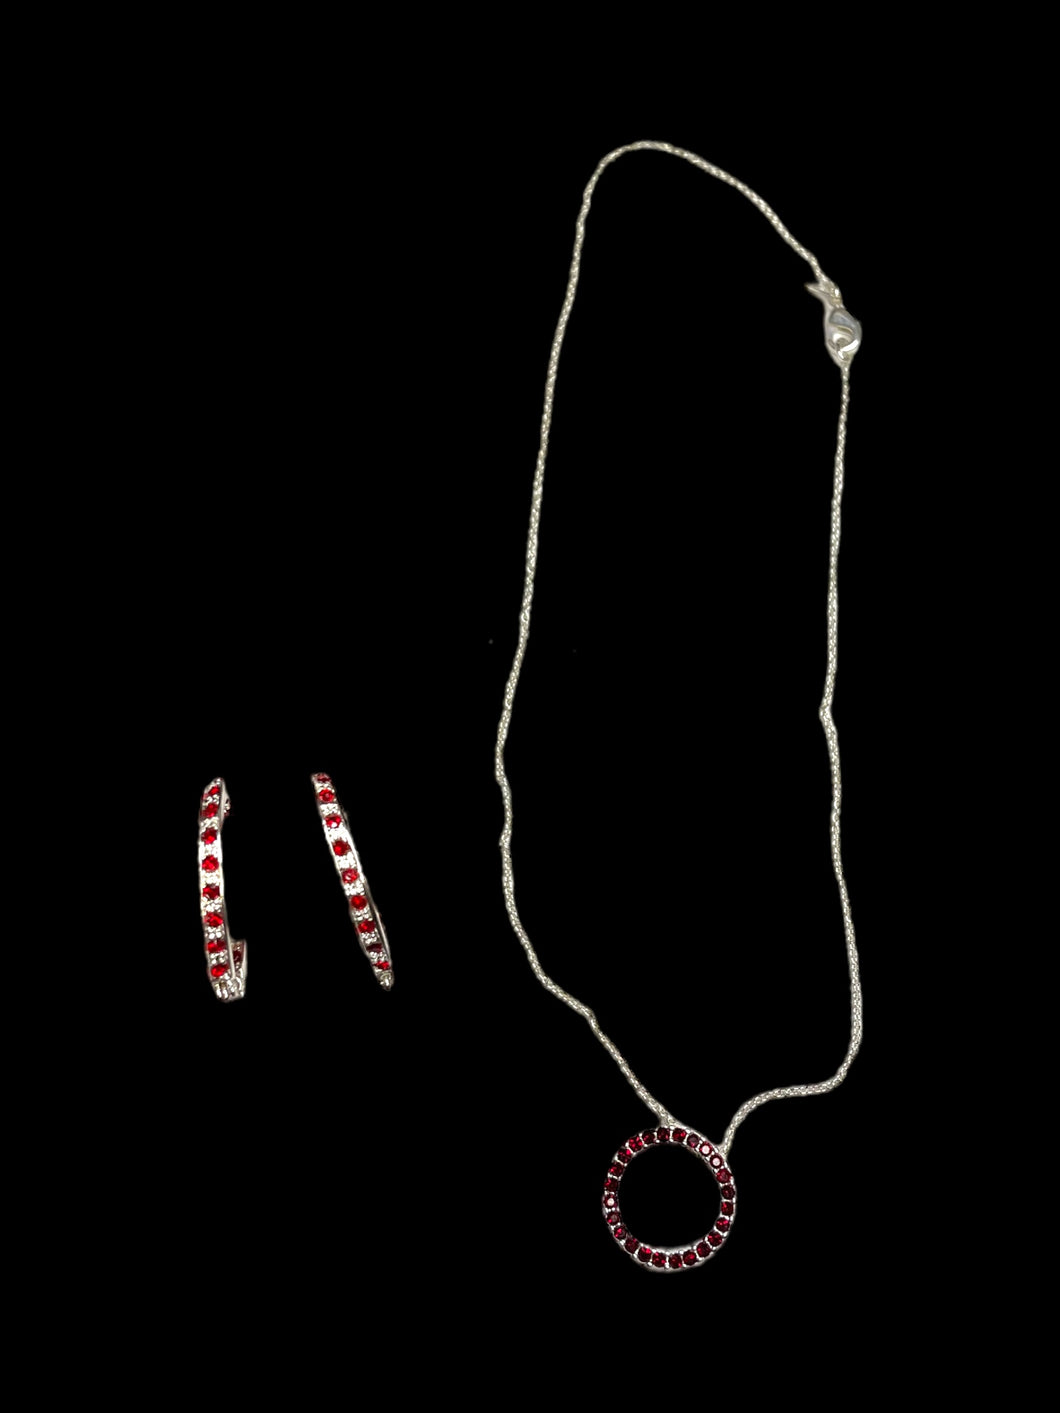 NWT Avon silver-like circle pendant necklace & hinge oval hoop earring set w/ red & clear cut gems, & necklace chain expander